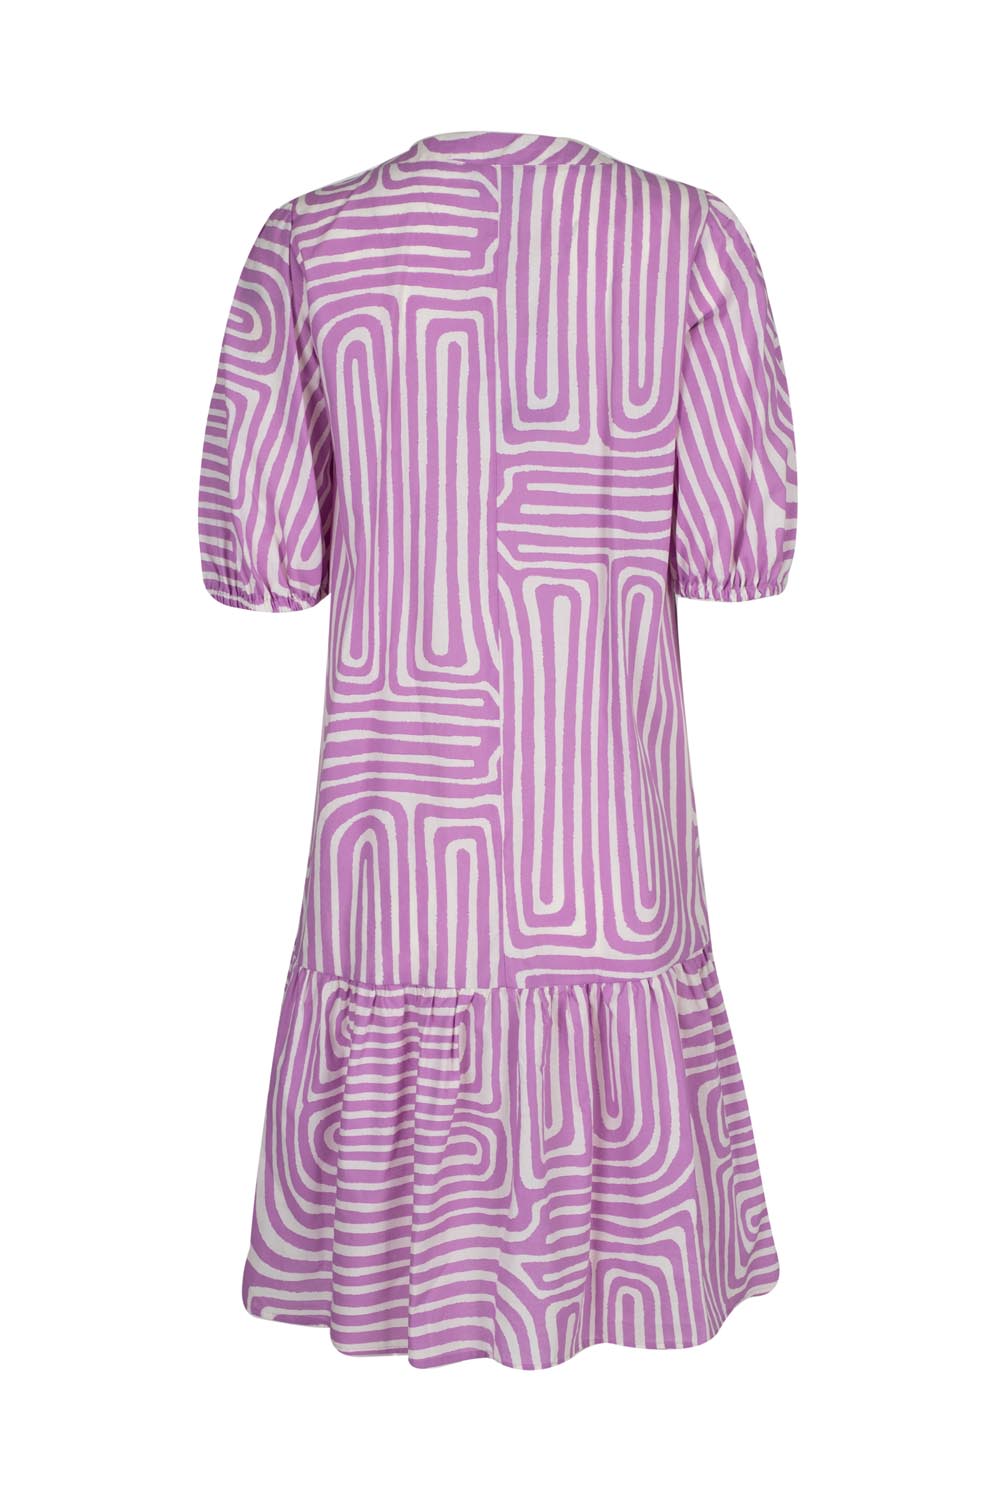 Tiered V Νeck Dress with Puffed Sleeves and (Separate) Extra Tie Belt